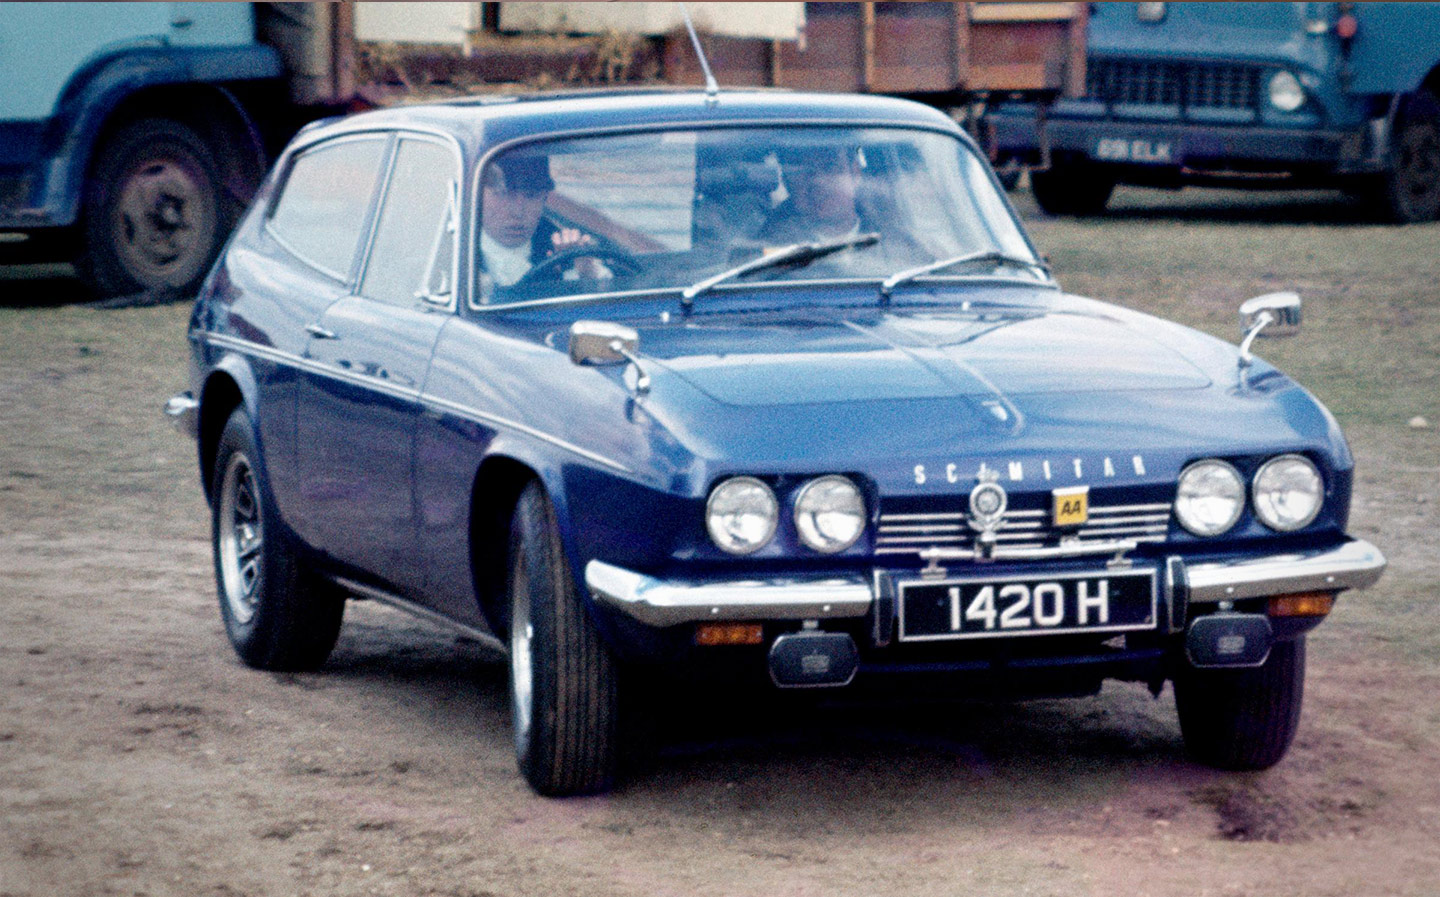 Reader Letters: Princess Anne’s Scimitar, wide cars, autonomous vehicles and taxing motorcycles